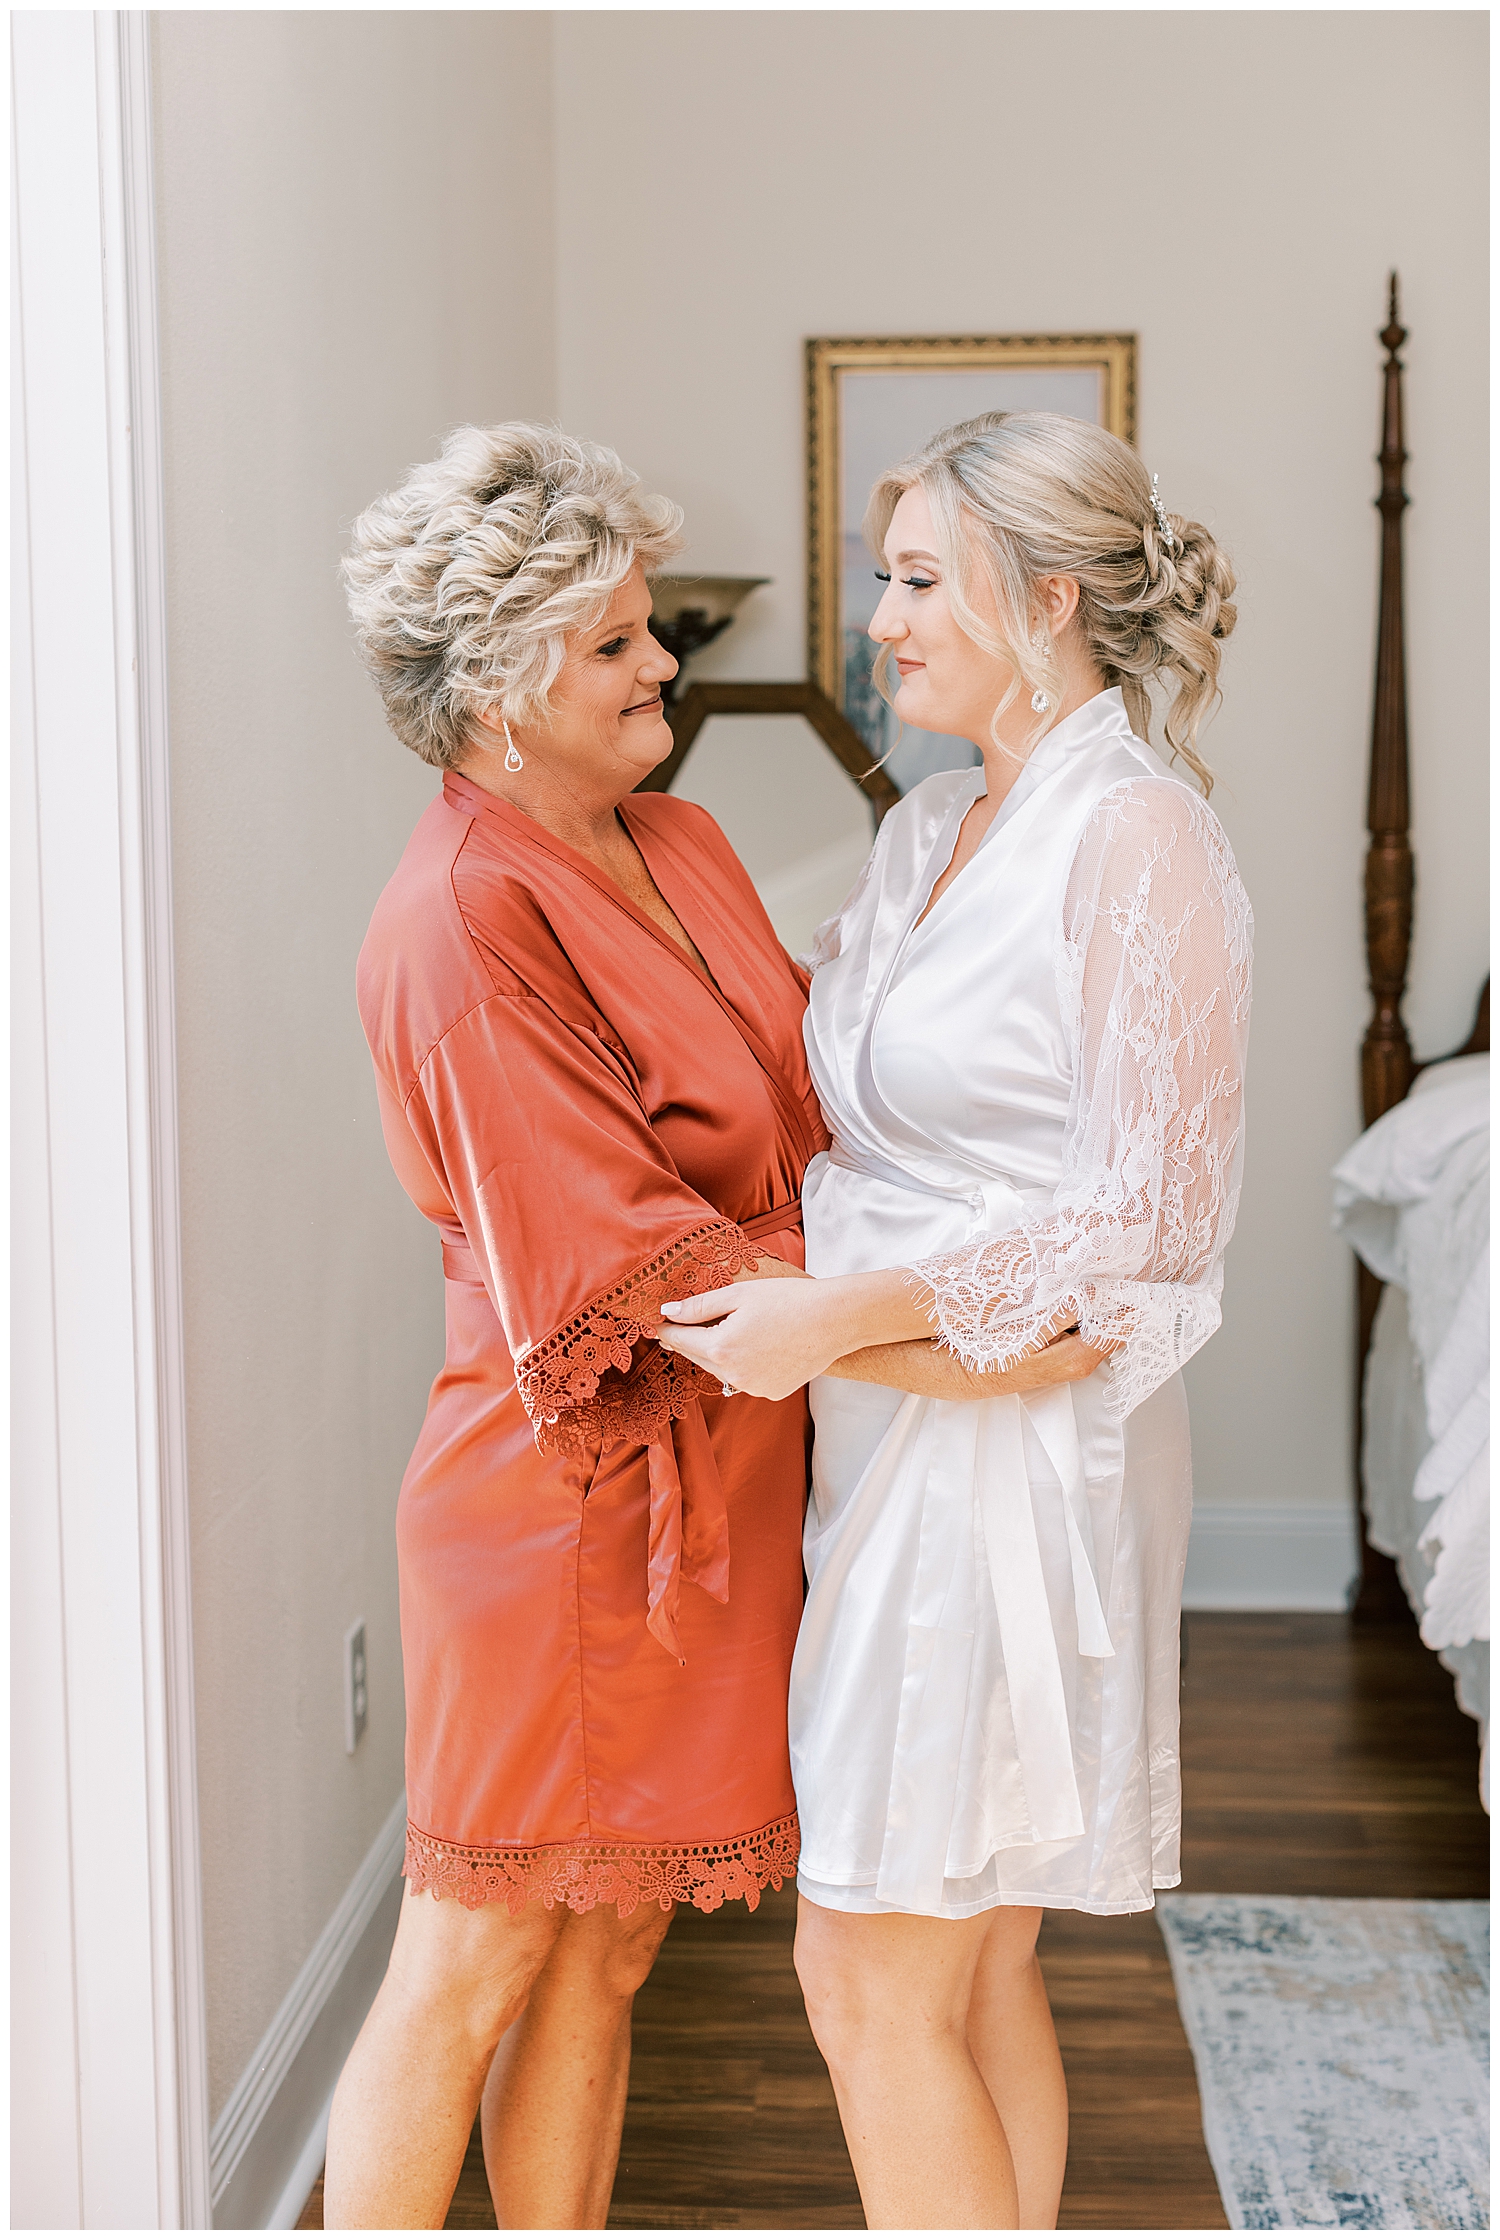 A bride and her mom smile at each other.